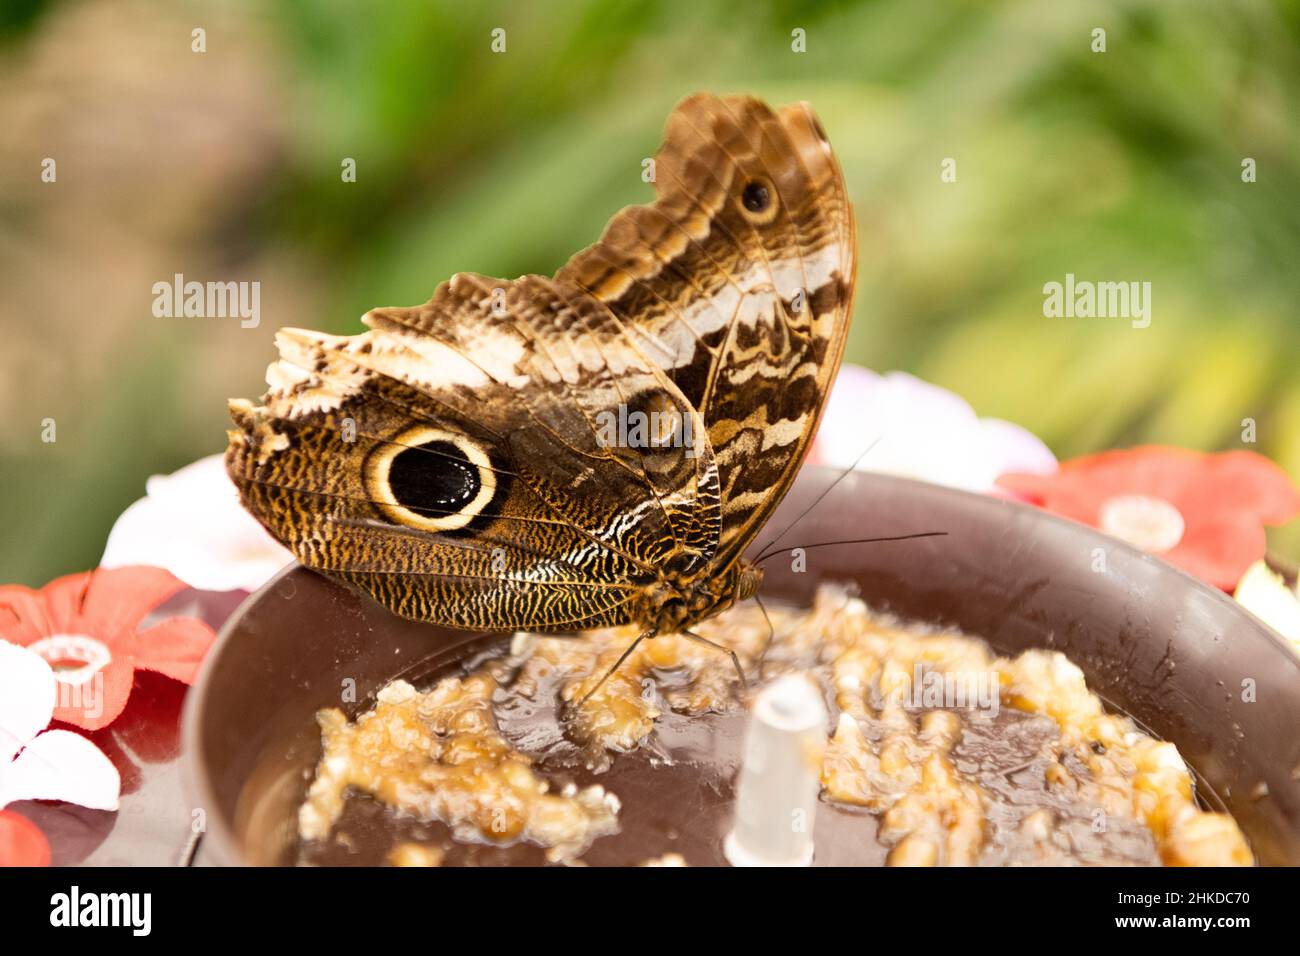 Brown peacock butterfly summer winged insect sitting in bowl on blurry nature natural background Stock Photo